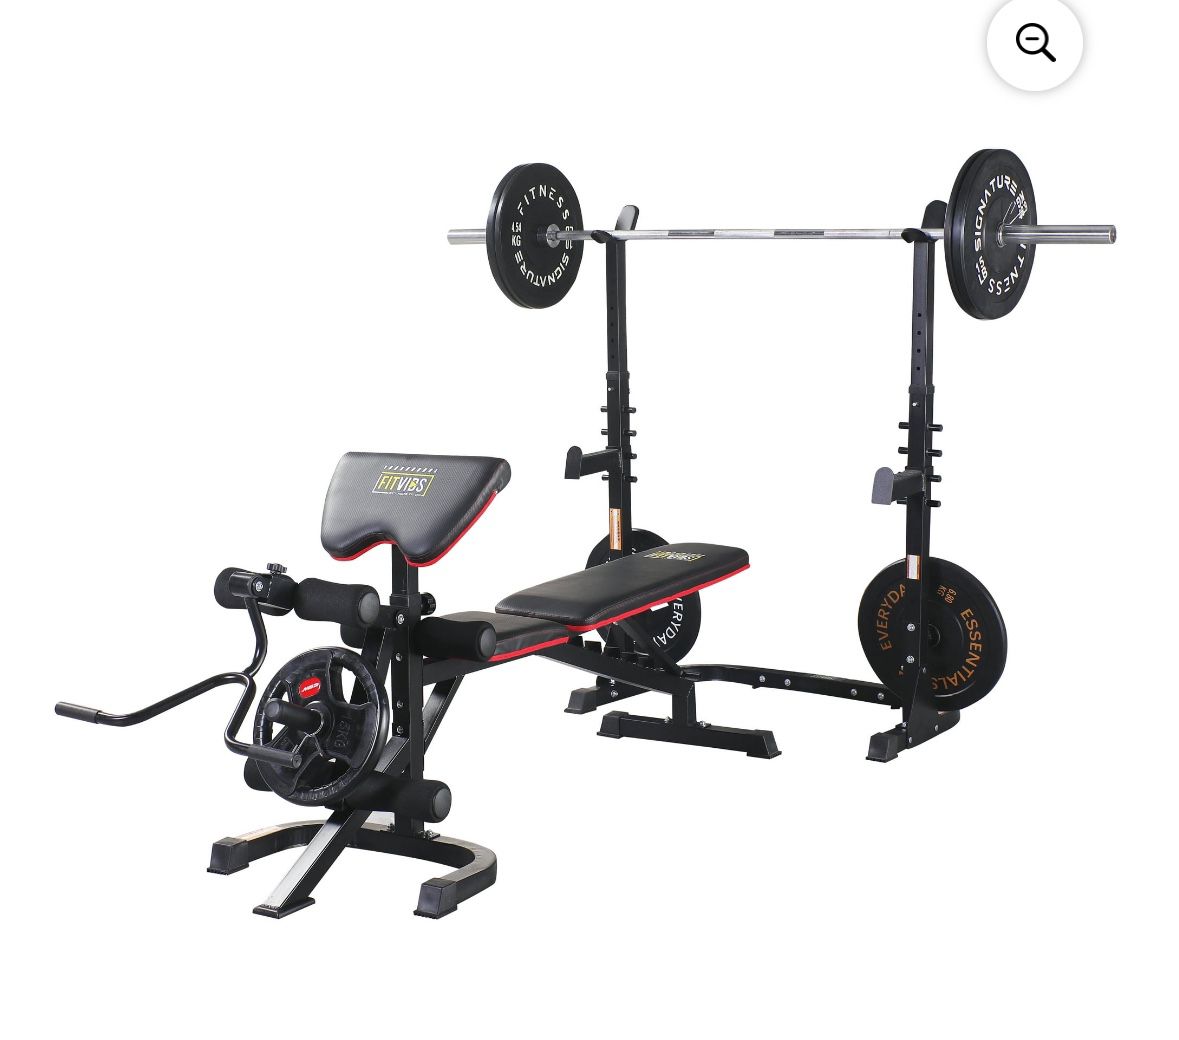 Fitvids LX600 Adjustable Olympic Workout Bench with Squat Rack, Leg Extension, Preacher Curl, and Weight Storage, 800-Pound Capacity (Barbell and weig